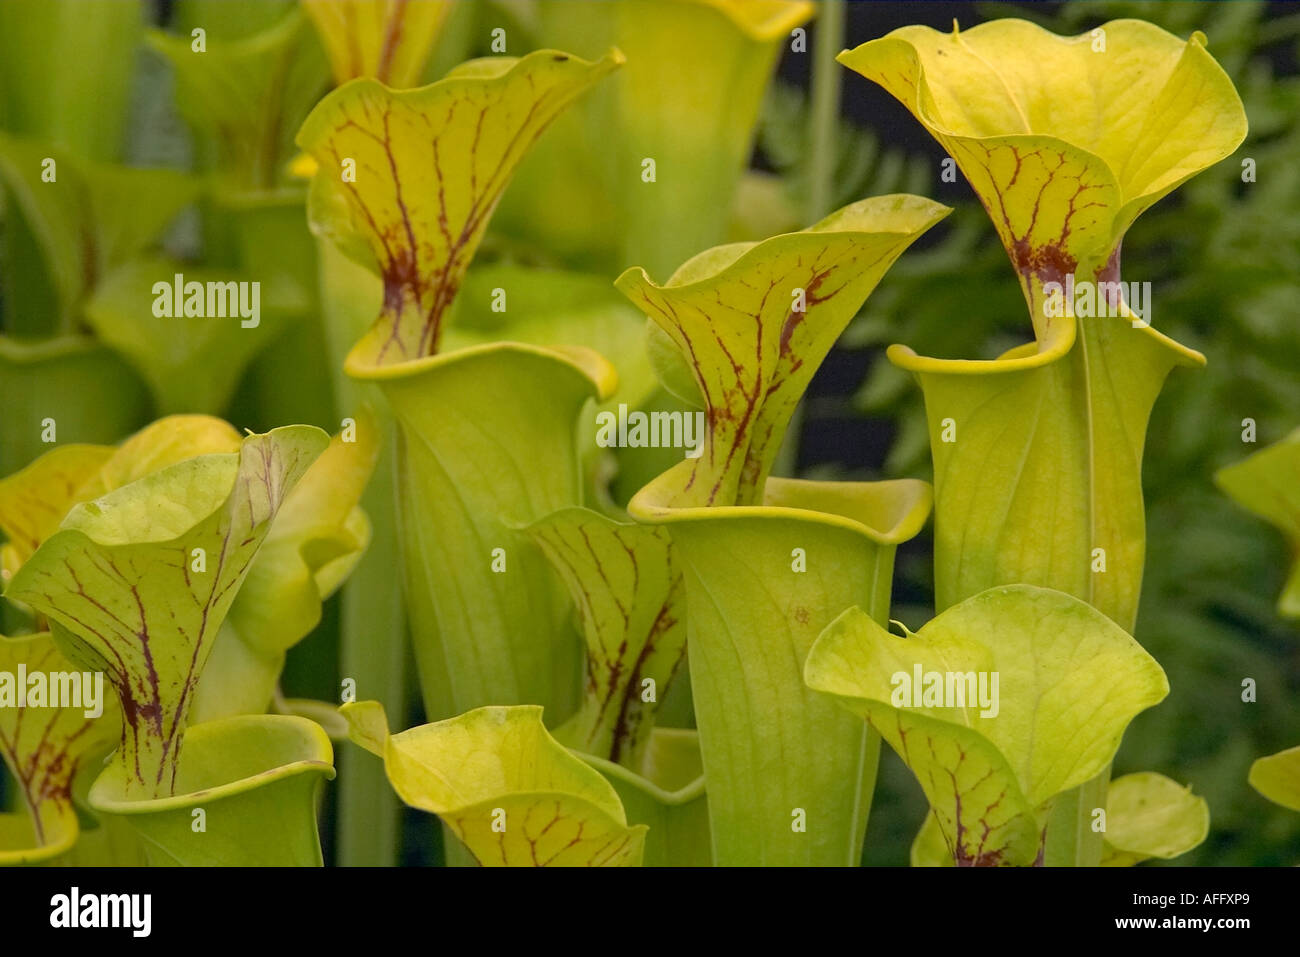 Pitcher plants on display at English village flower show Stock Photo